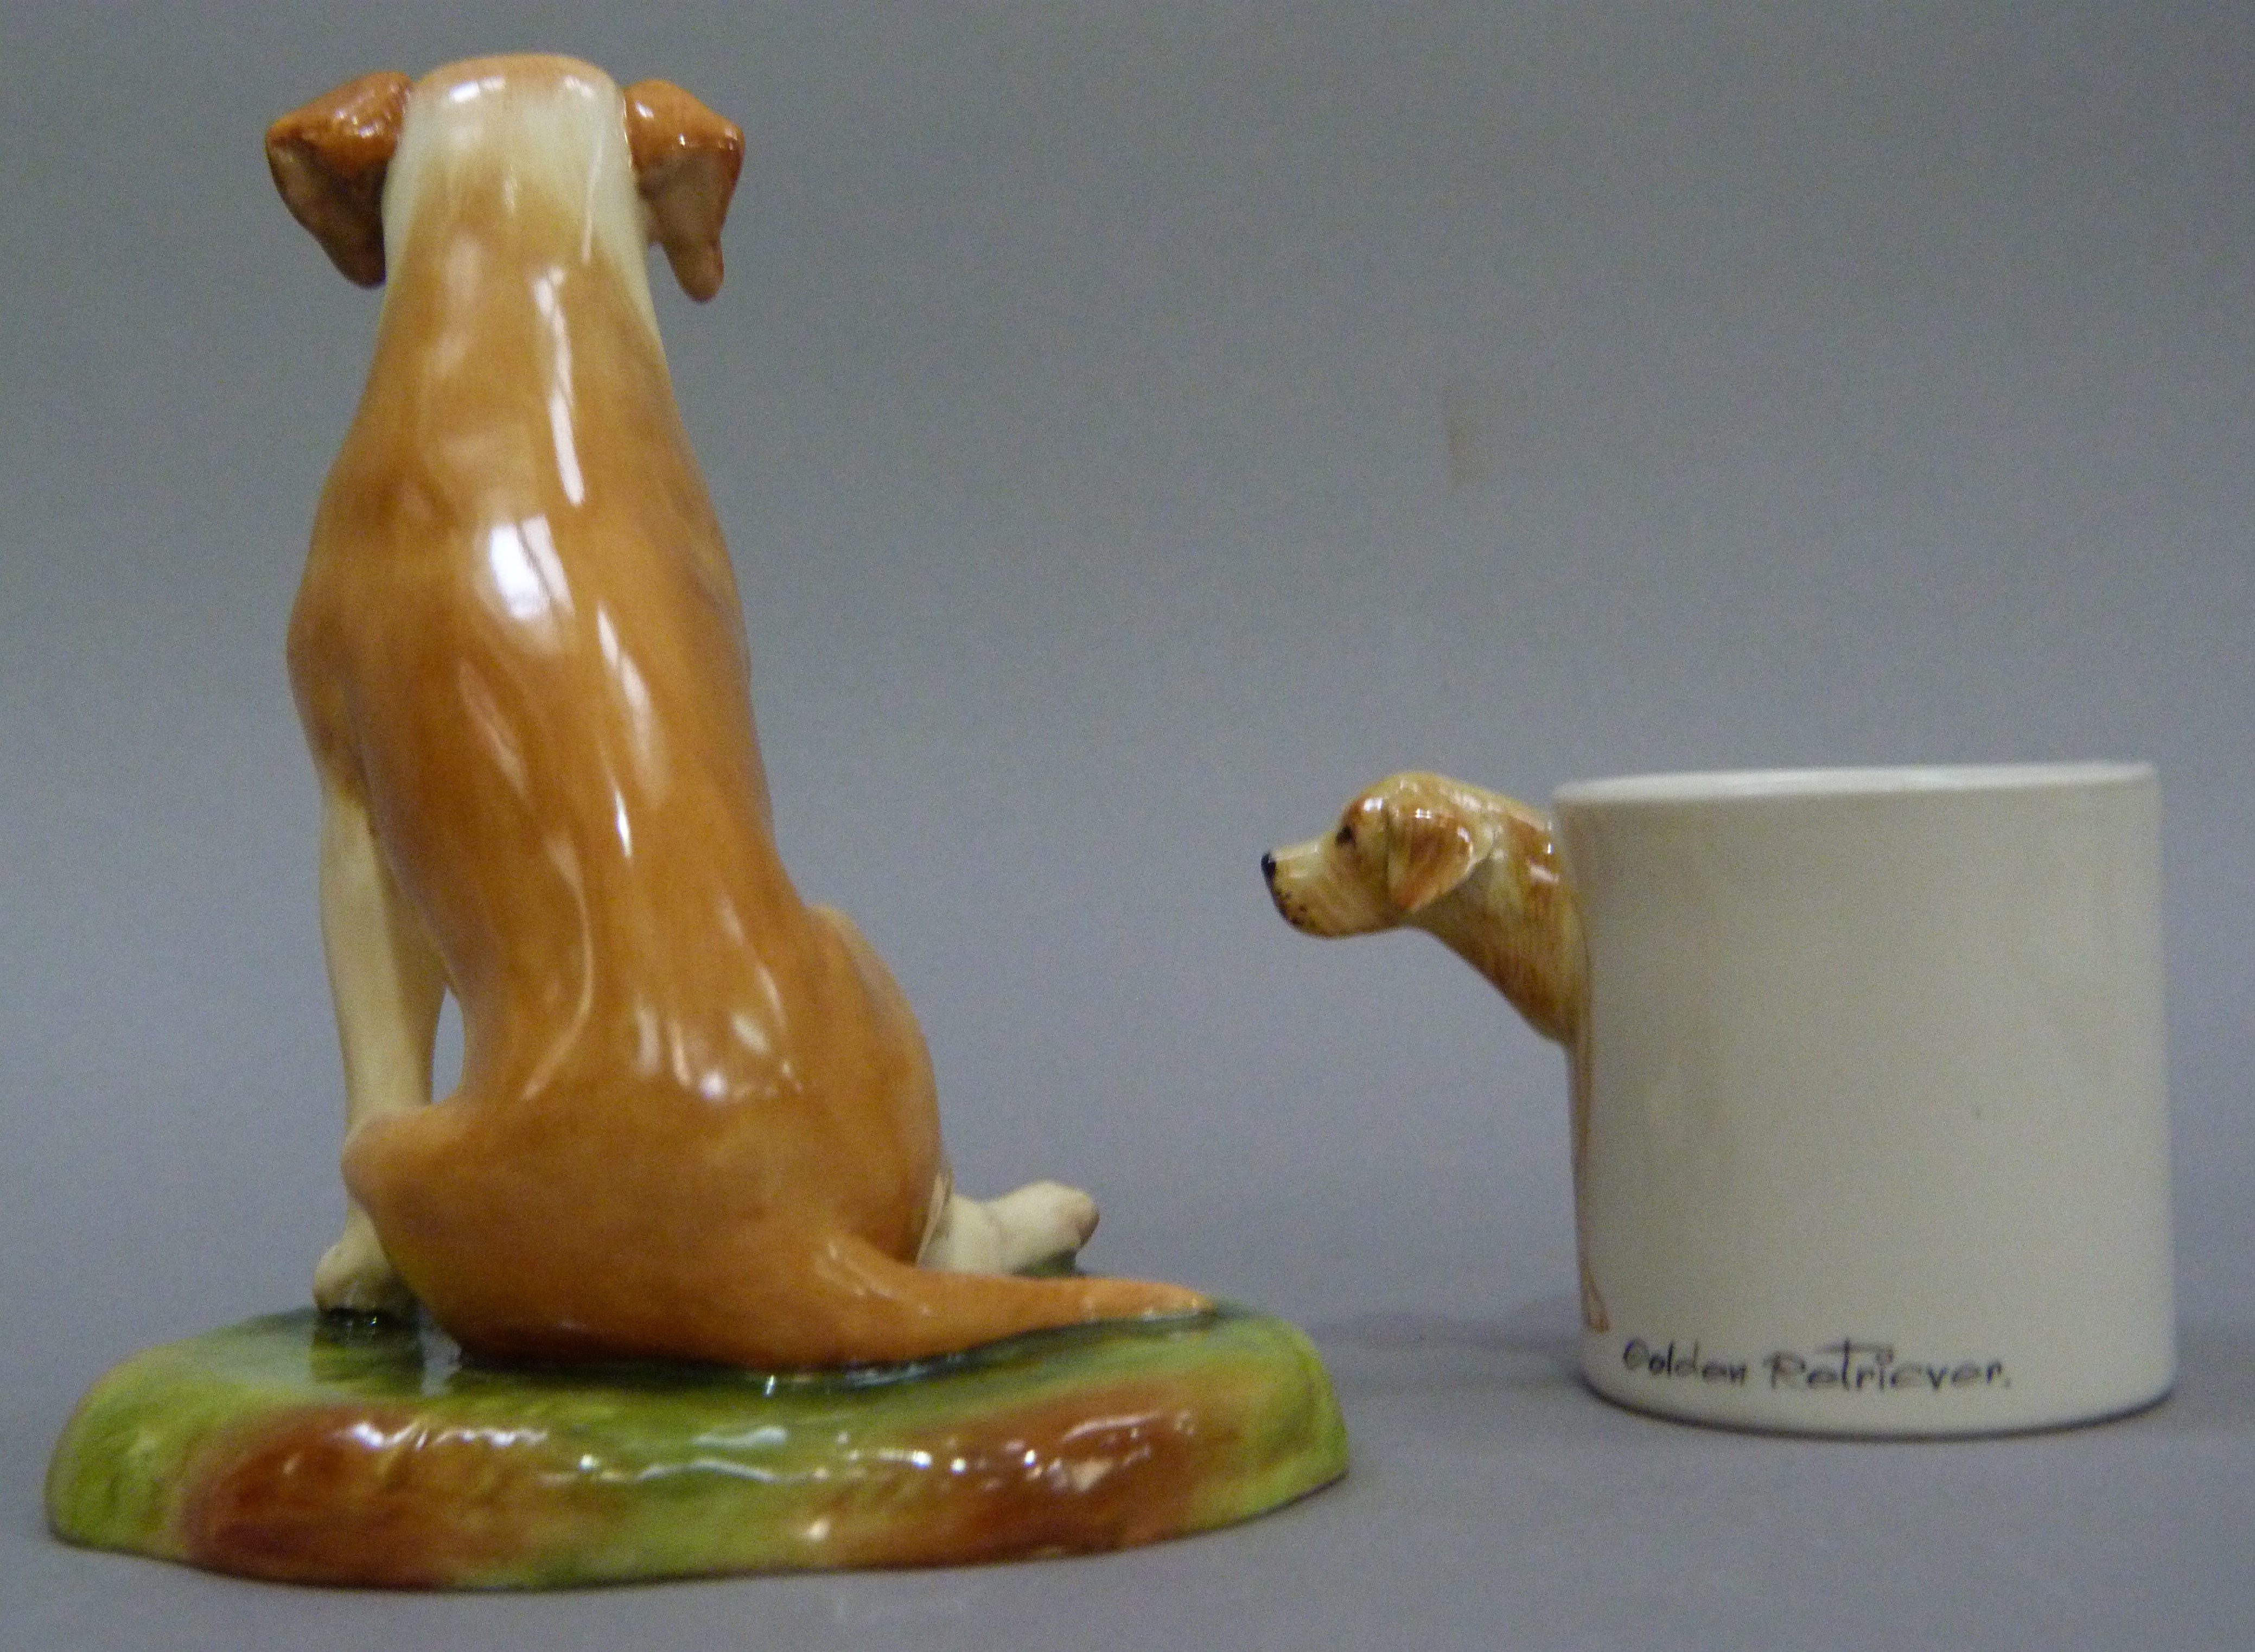 A china figure of a labrador by Royale Stratford together with a golden retriever mug the handle - Image 2 of 4